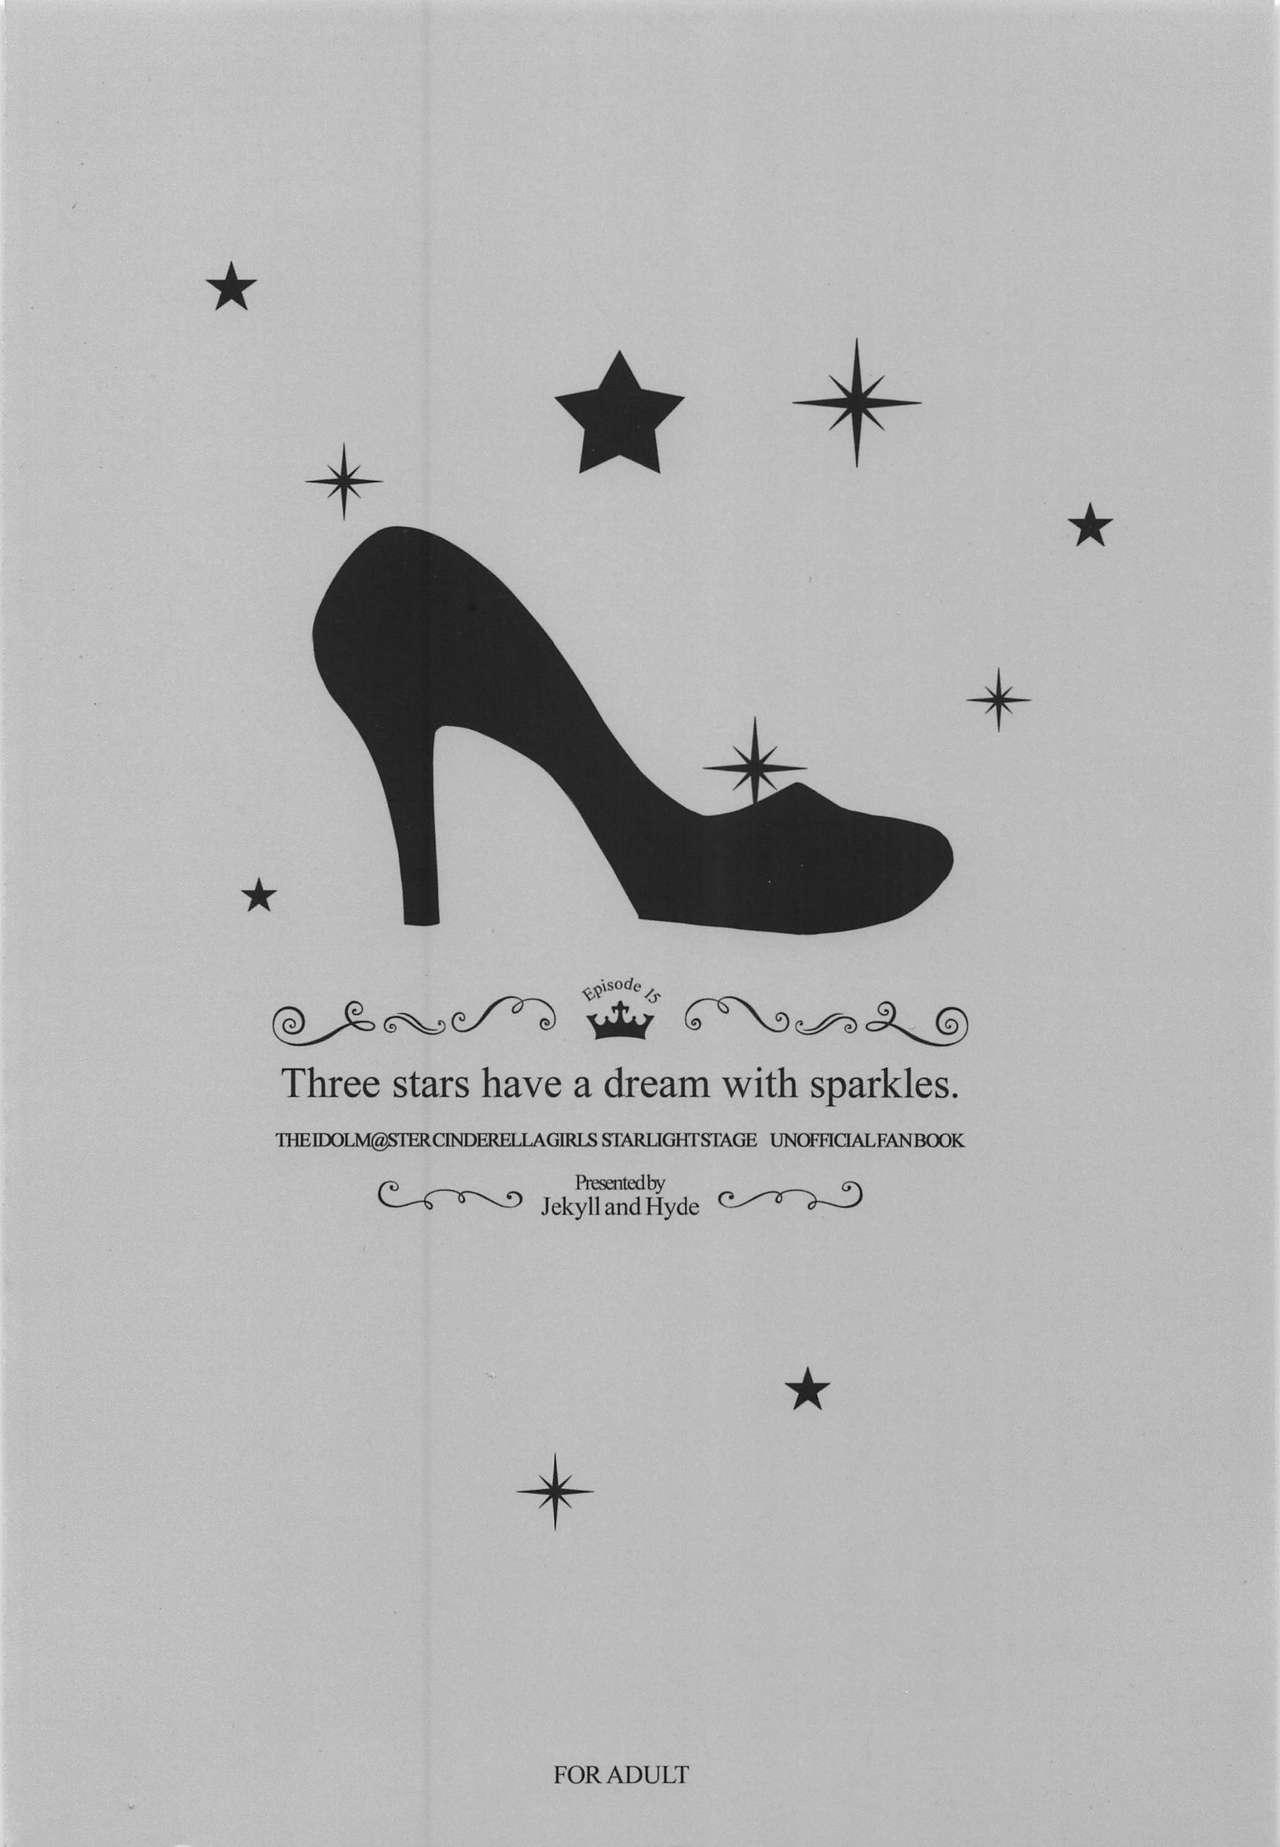 Three stars have a dream with sparkles. 29